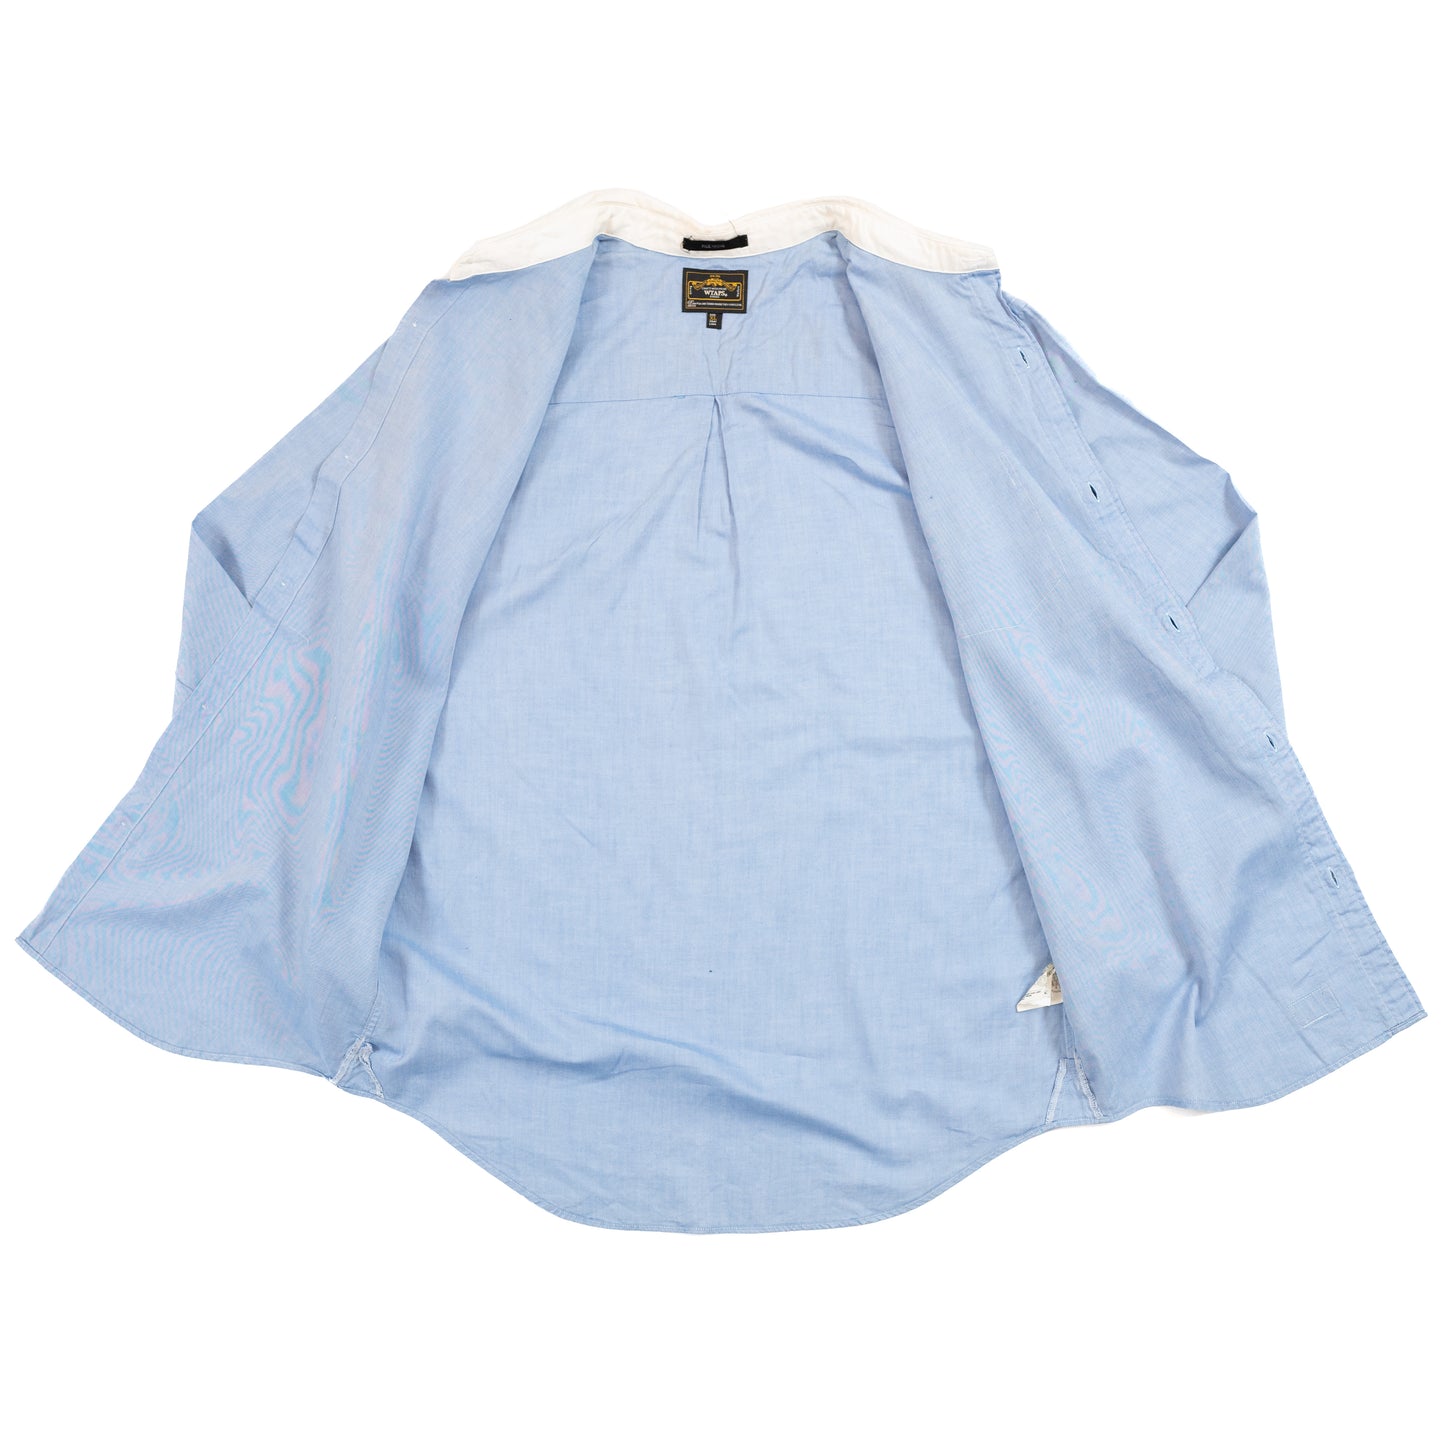 Wtaps 'Dazed and Confused' Spread Shirt (2009AW)